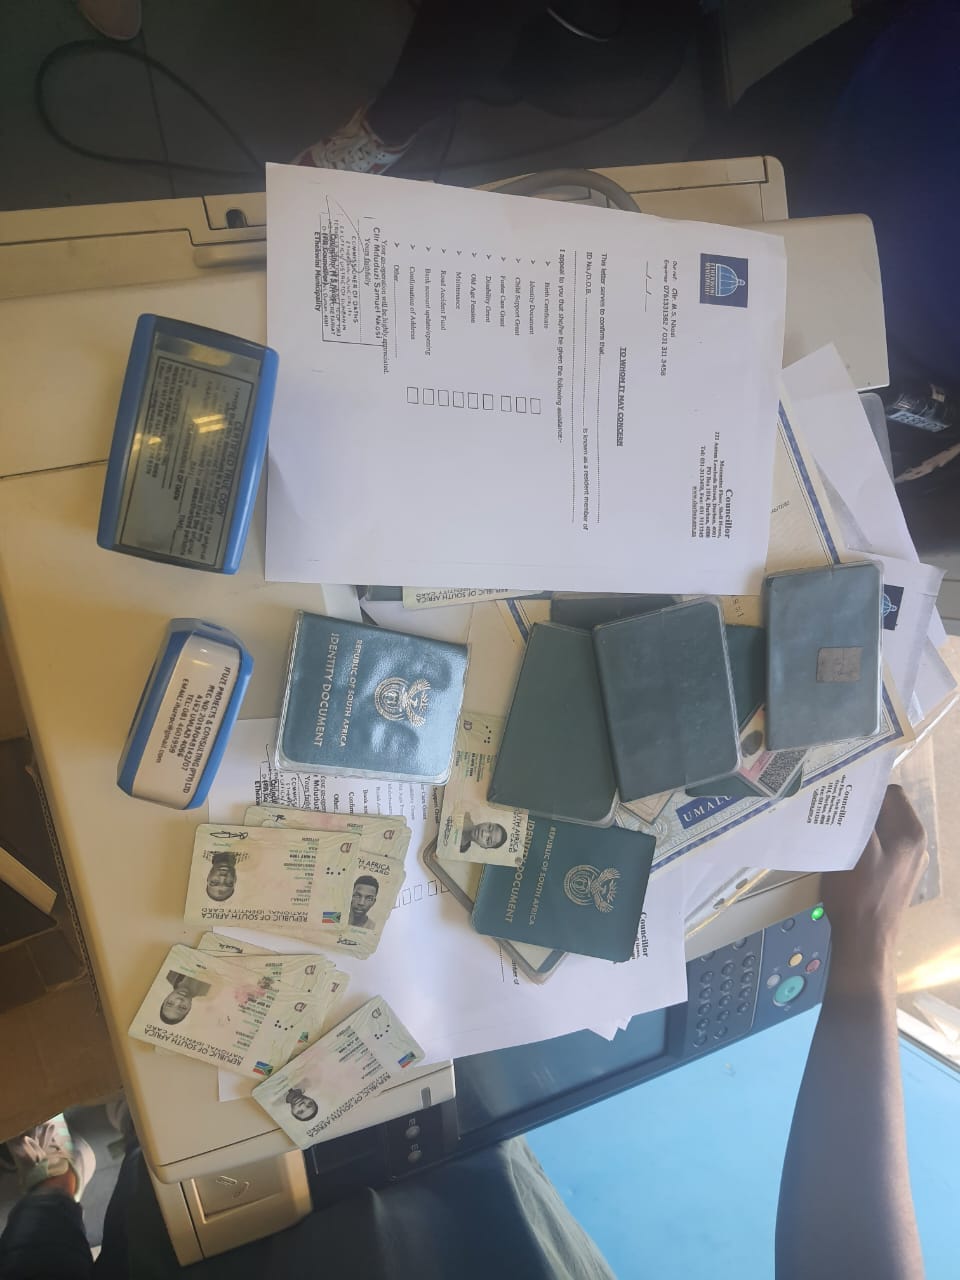 Three arrested for selling fraudulent proof of residence certificates at Kwamnyandu Mall in Umlazi